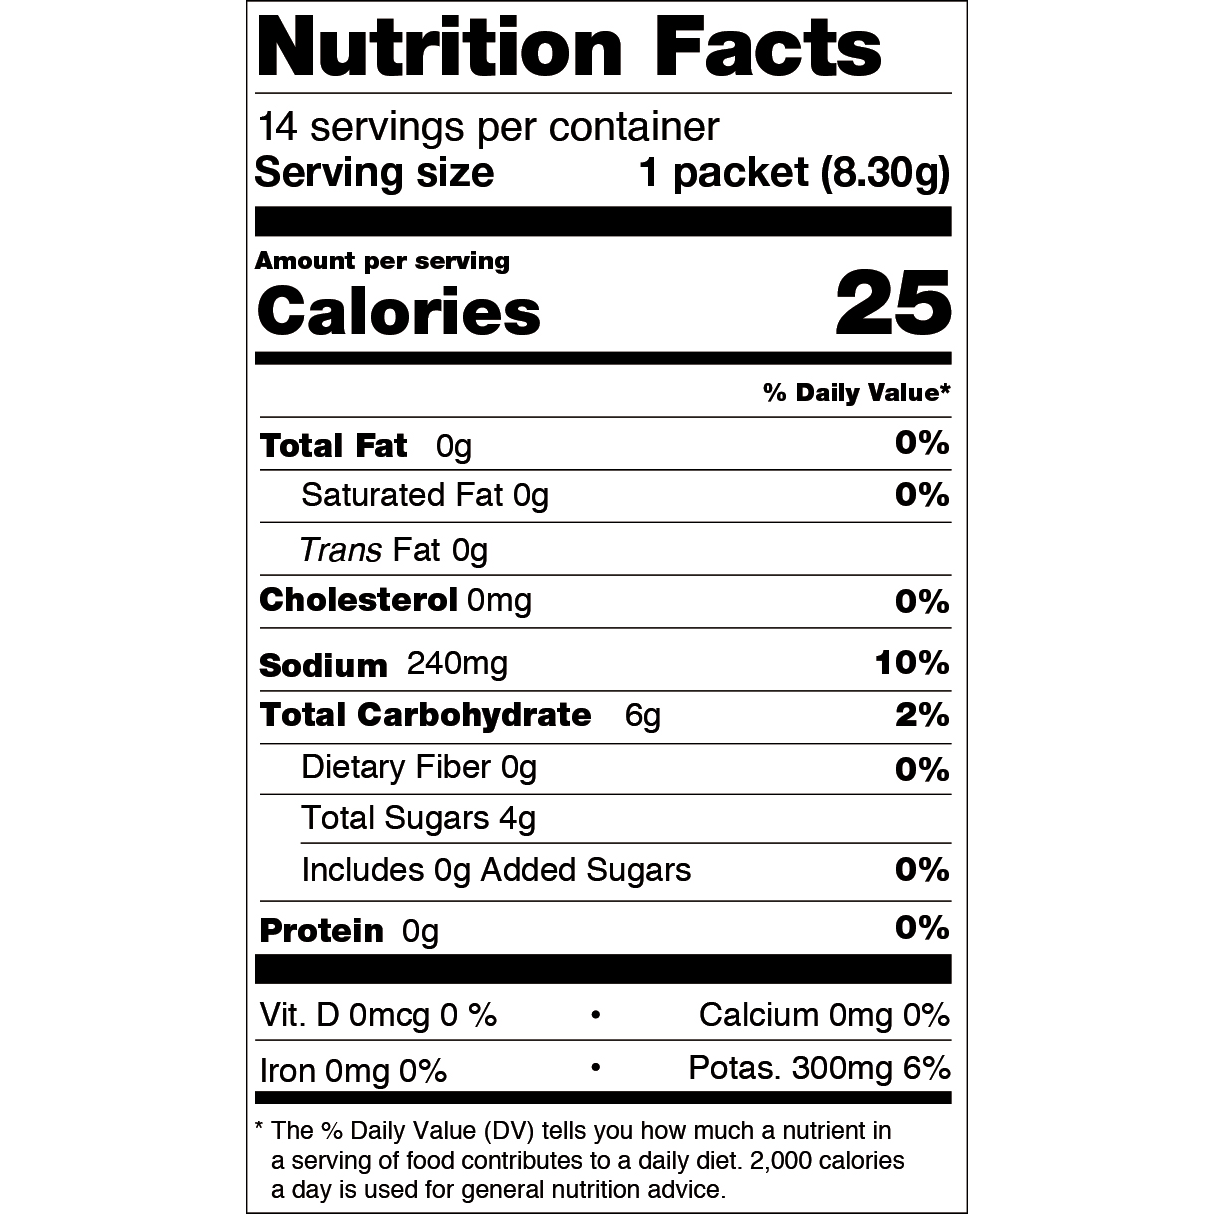 Nutrition facts for orange electrolyte mix.